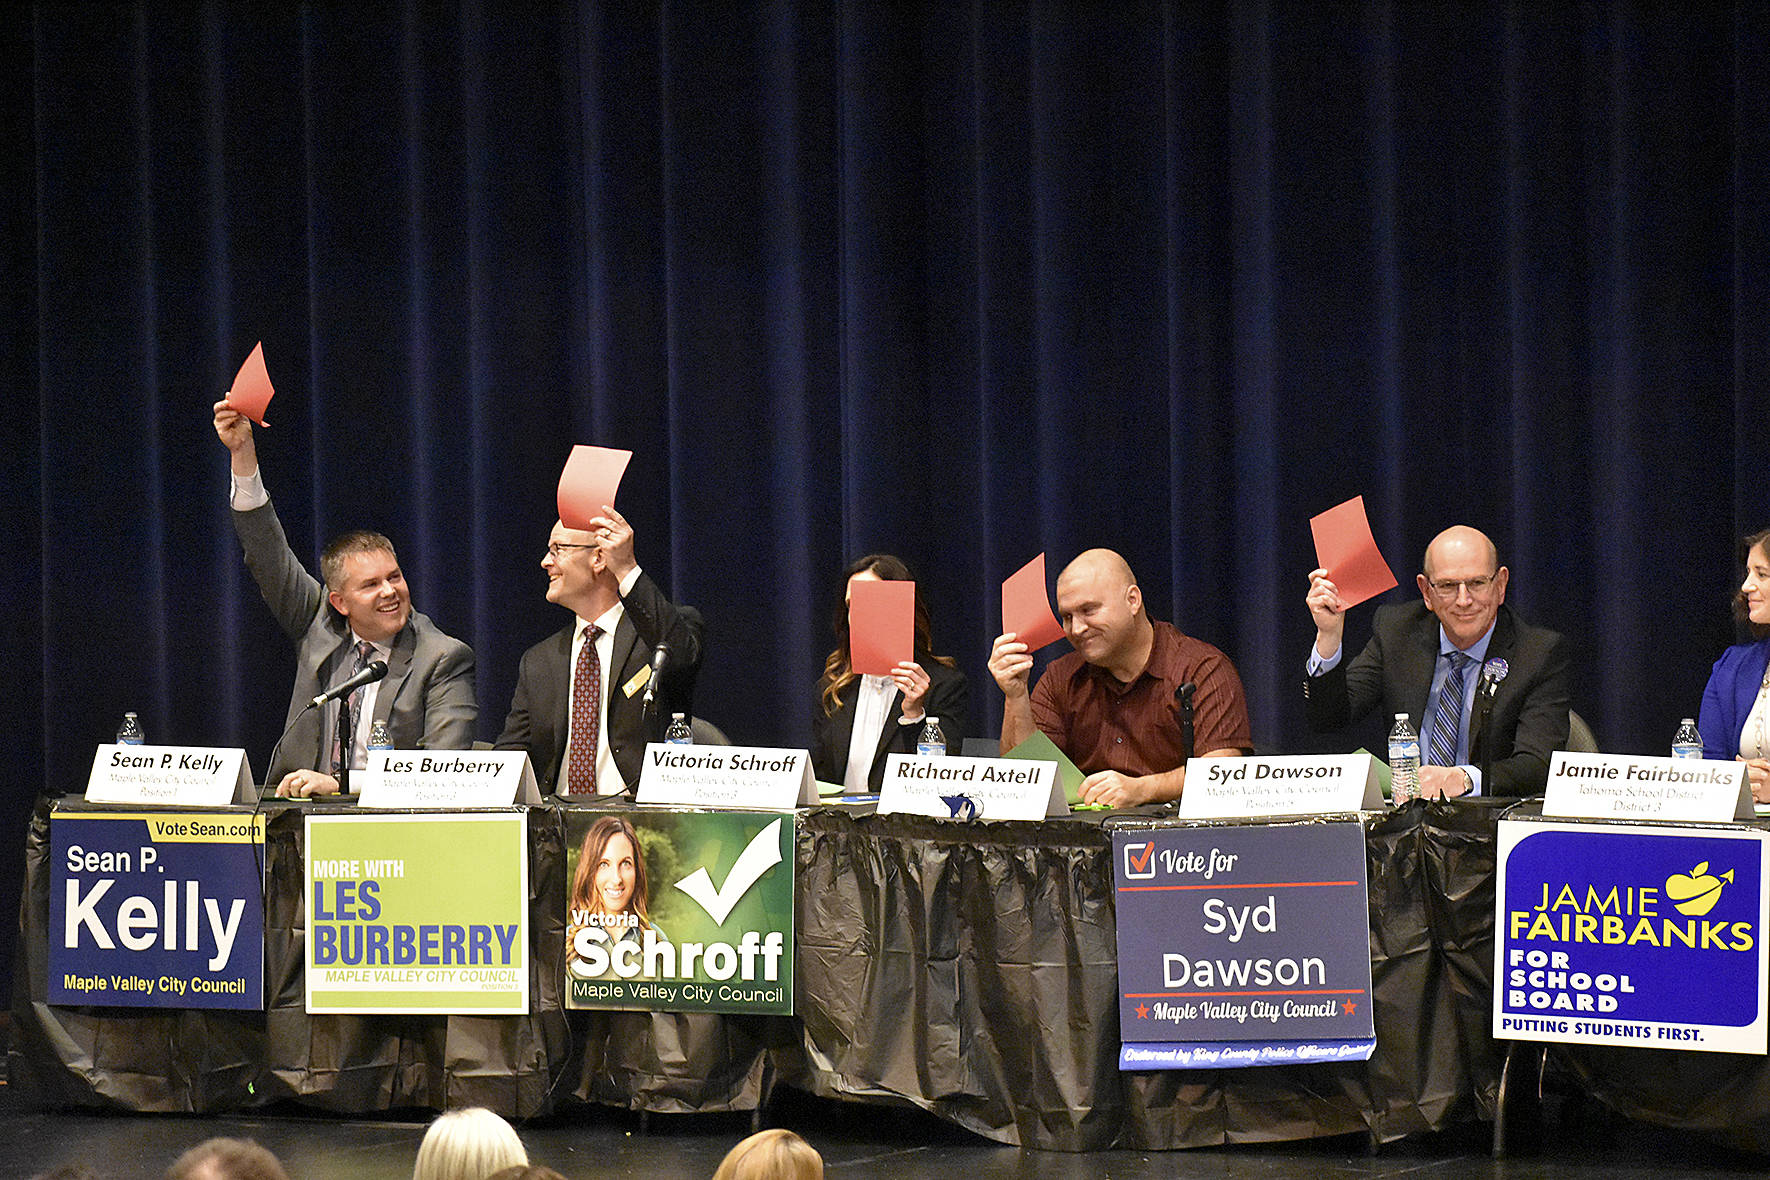 Photo by Haley Ausbun. One segment of the Maple Valley Candidate forum, Oct. 17 at Tahoma High School, included asking candidates yes or no questions by raising a red or green card. All city candidates, Sean Kelly, Les Burberry, Victoria Schroff, Richard Axtell and Syd Dawson raised a card to indicate no on a question.